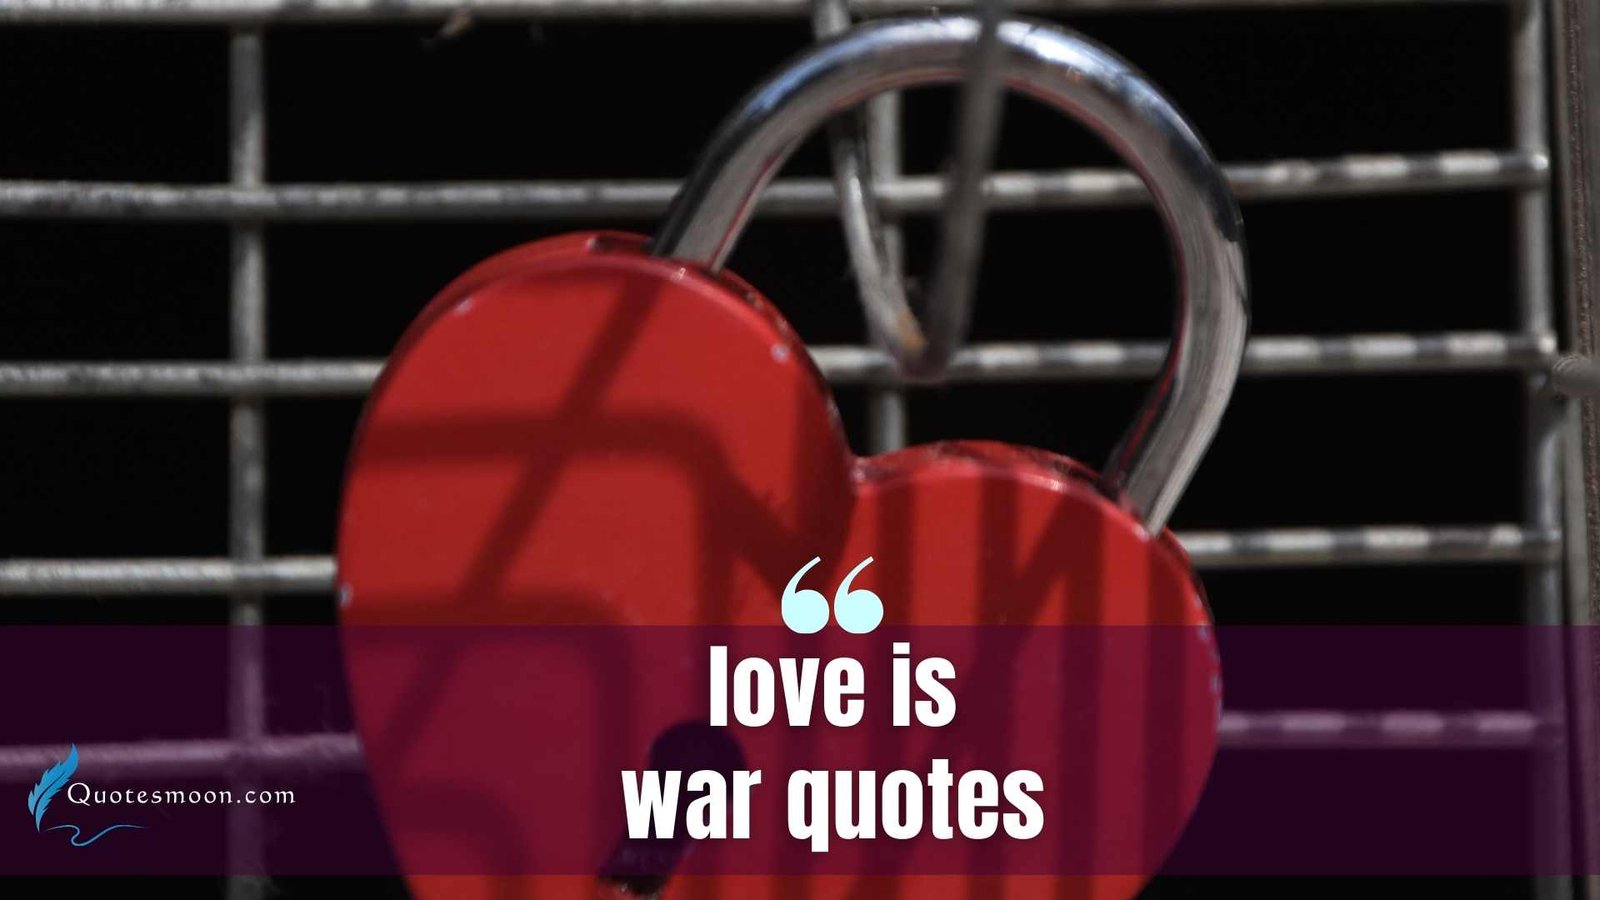 love is war quotes images